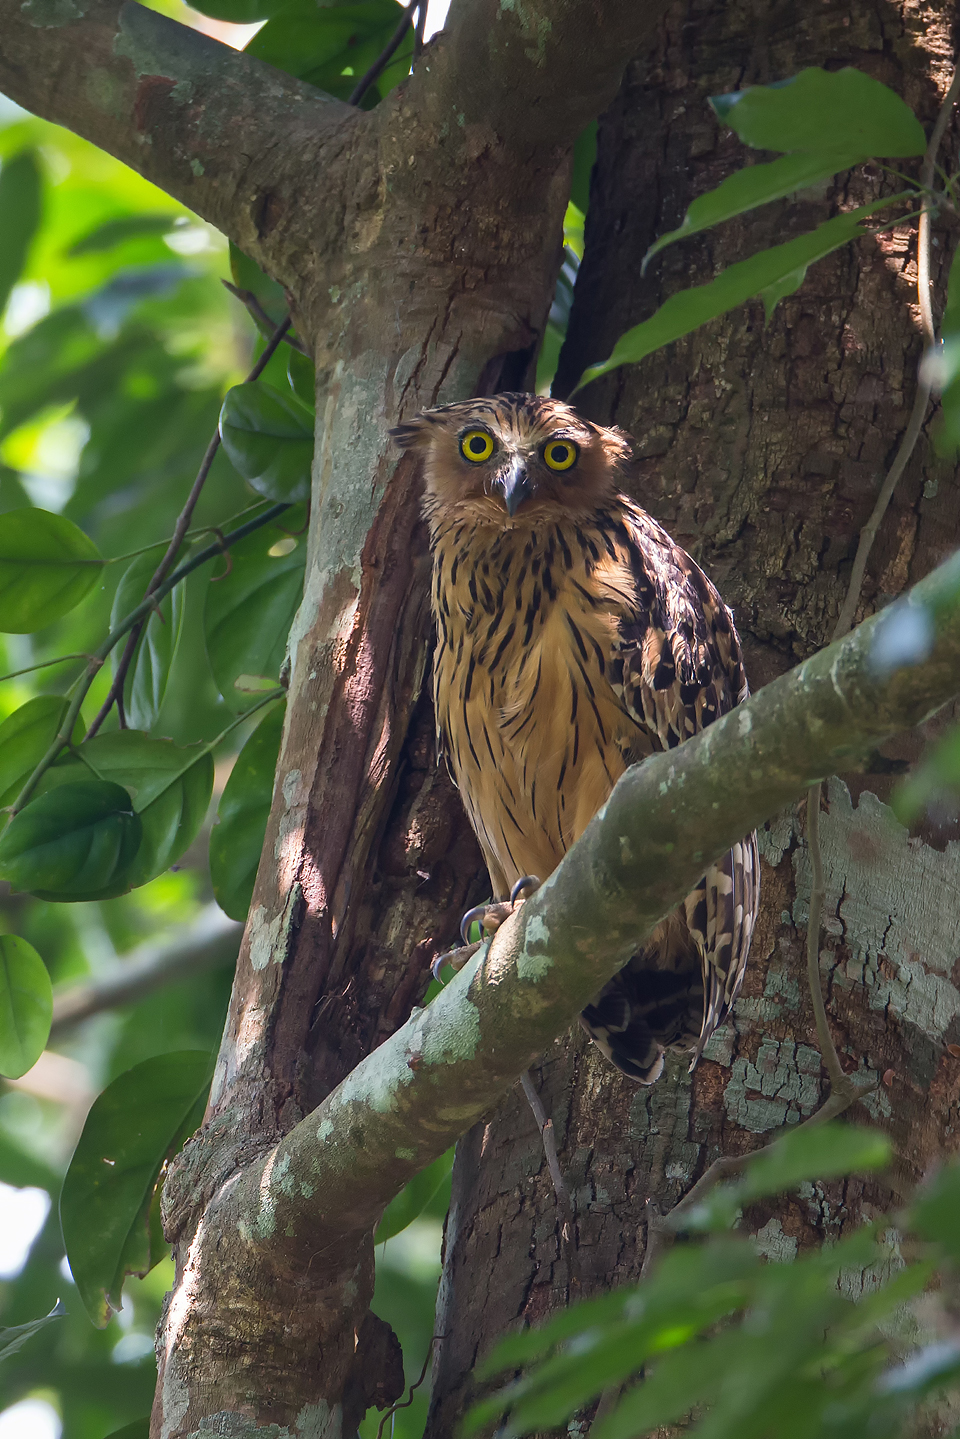 meet another Buffy Fish-Owl in the day time .. 光天化日马来渔鸮